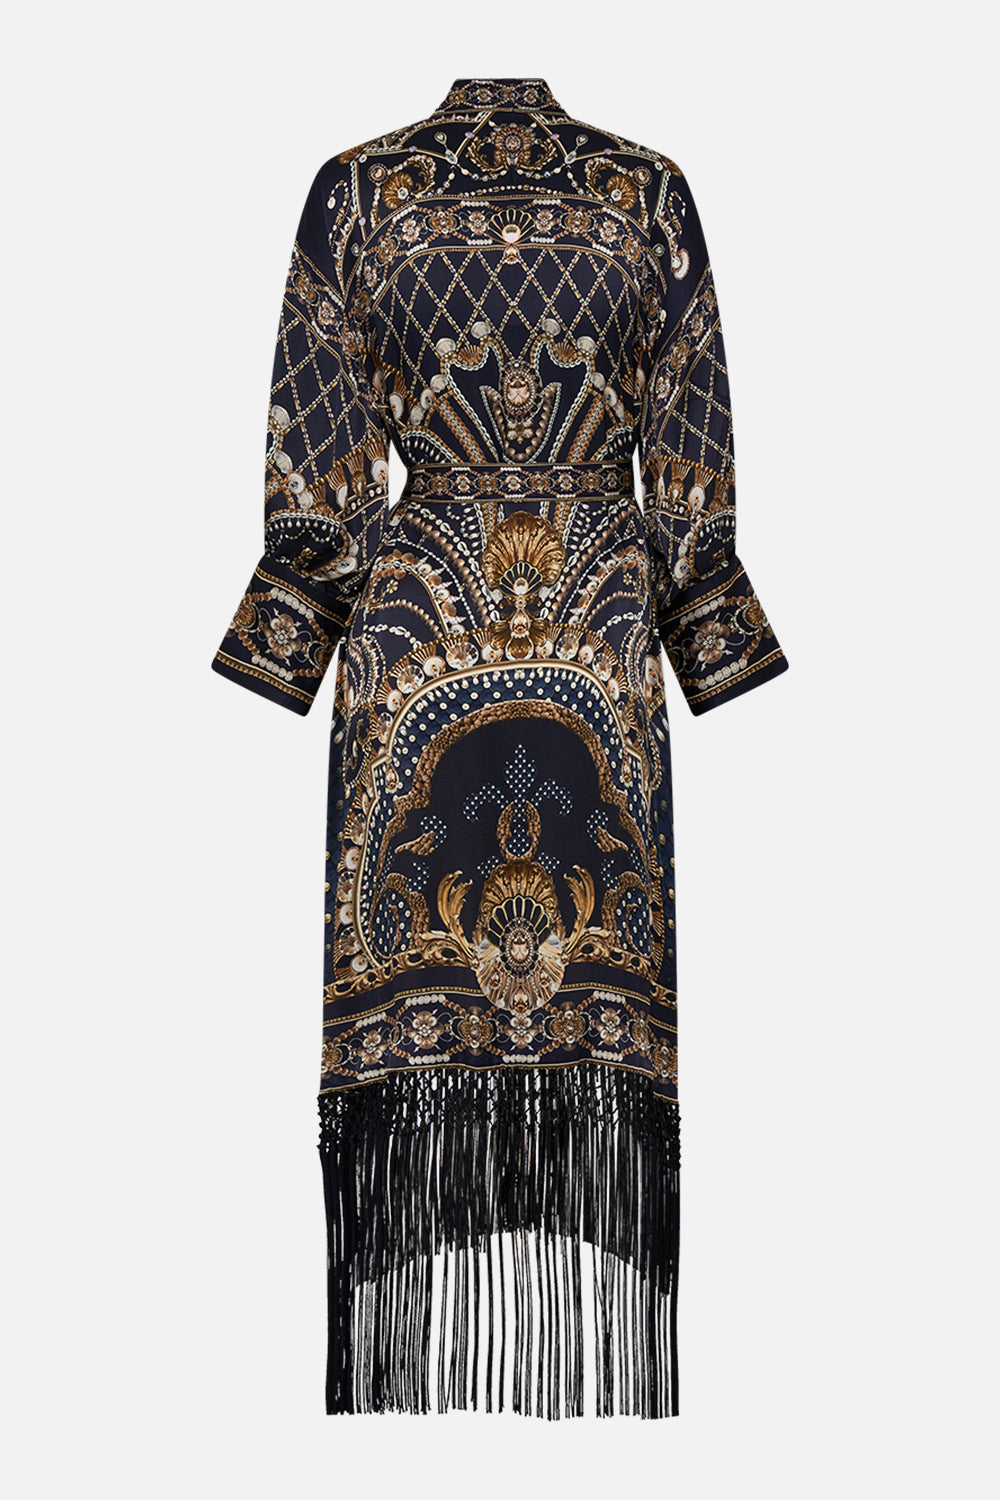 CAMILLA Gold High Low Hem Layer with Macrame Fringing in Dance with the Duke print